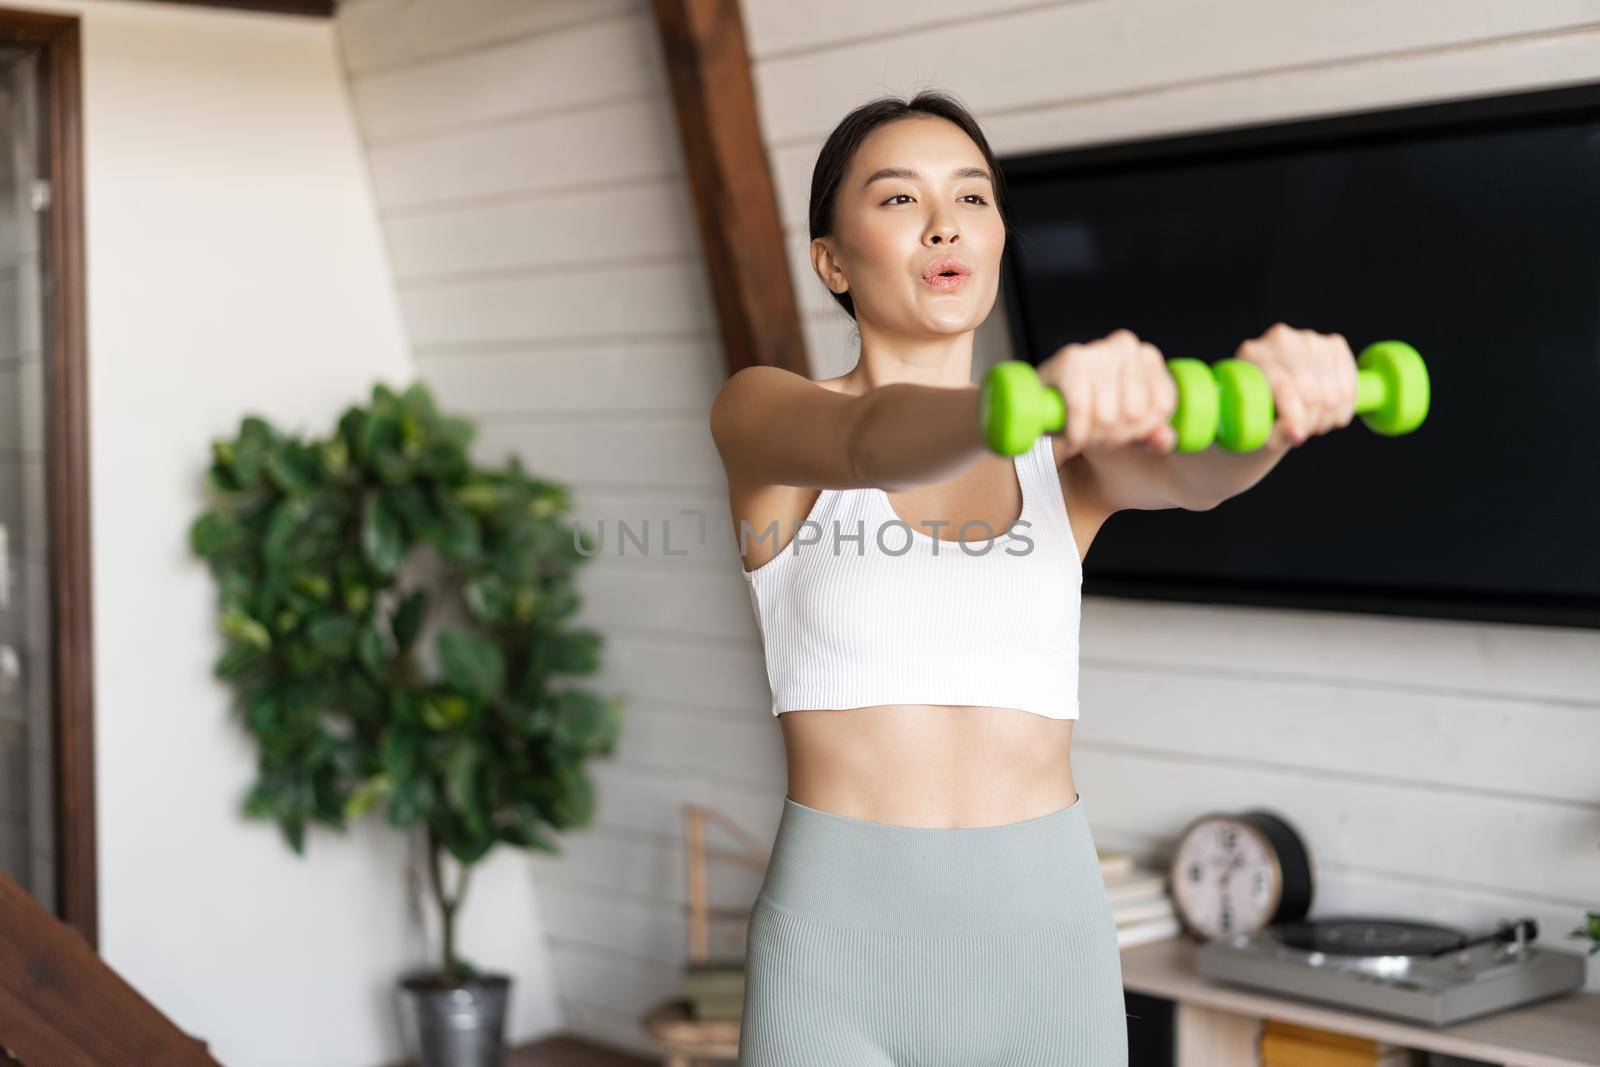 Fitness asian girl doing workout at home in living room, lifting dumbbells, wearing activewear for sport activities.